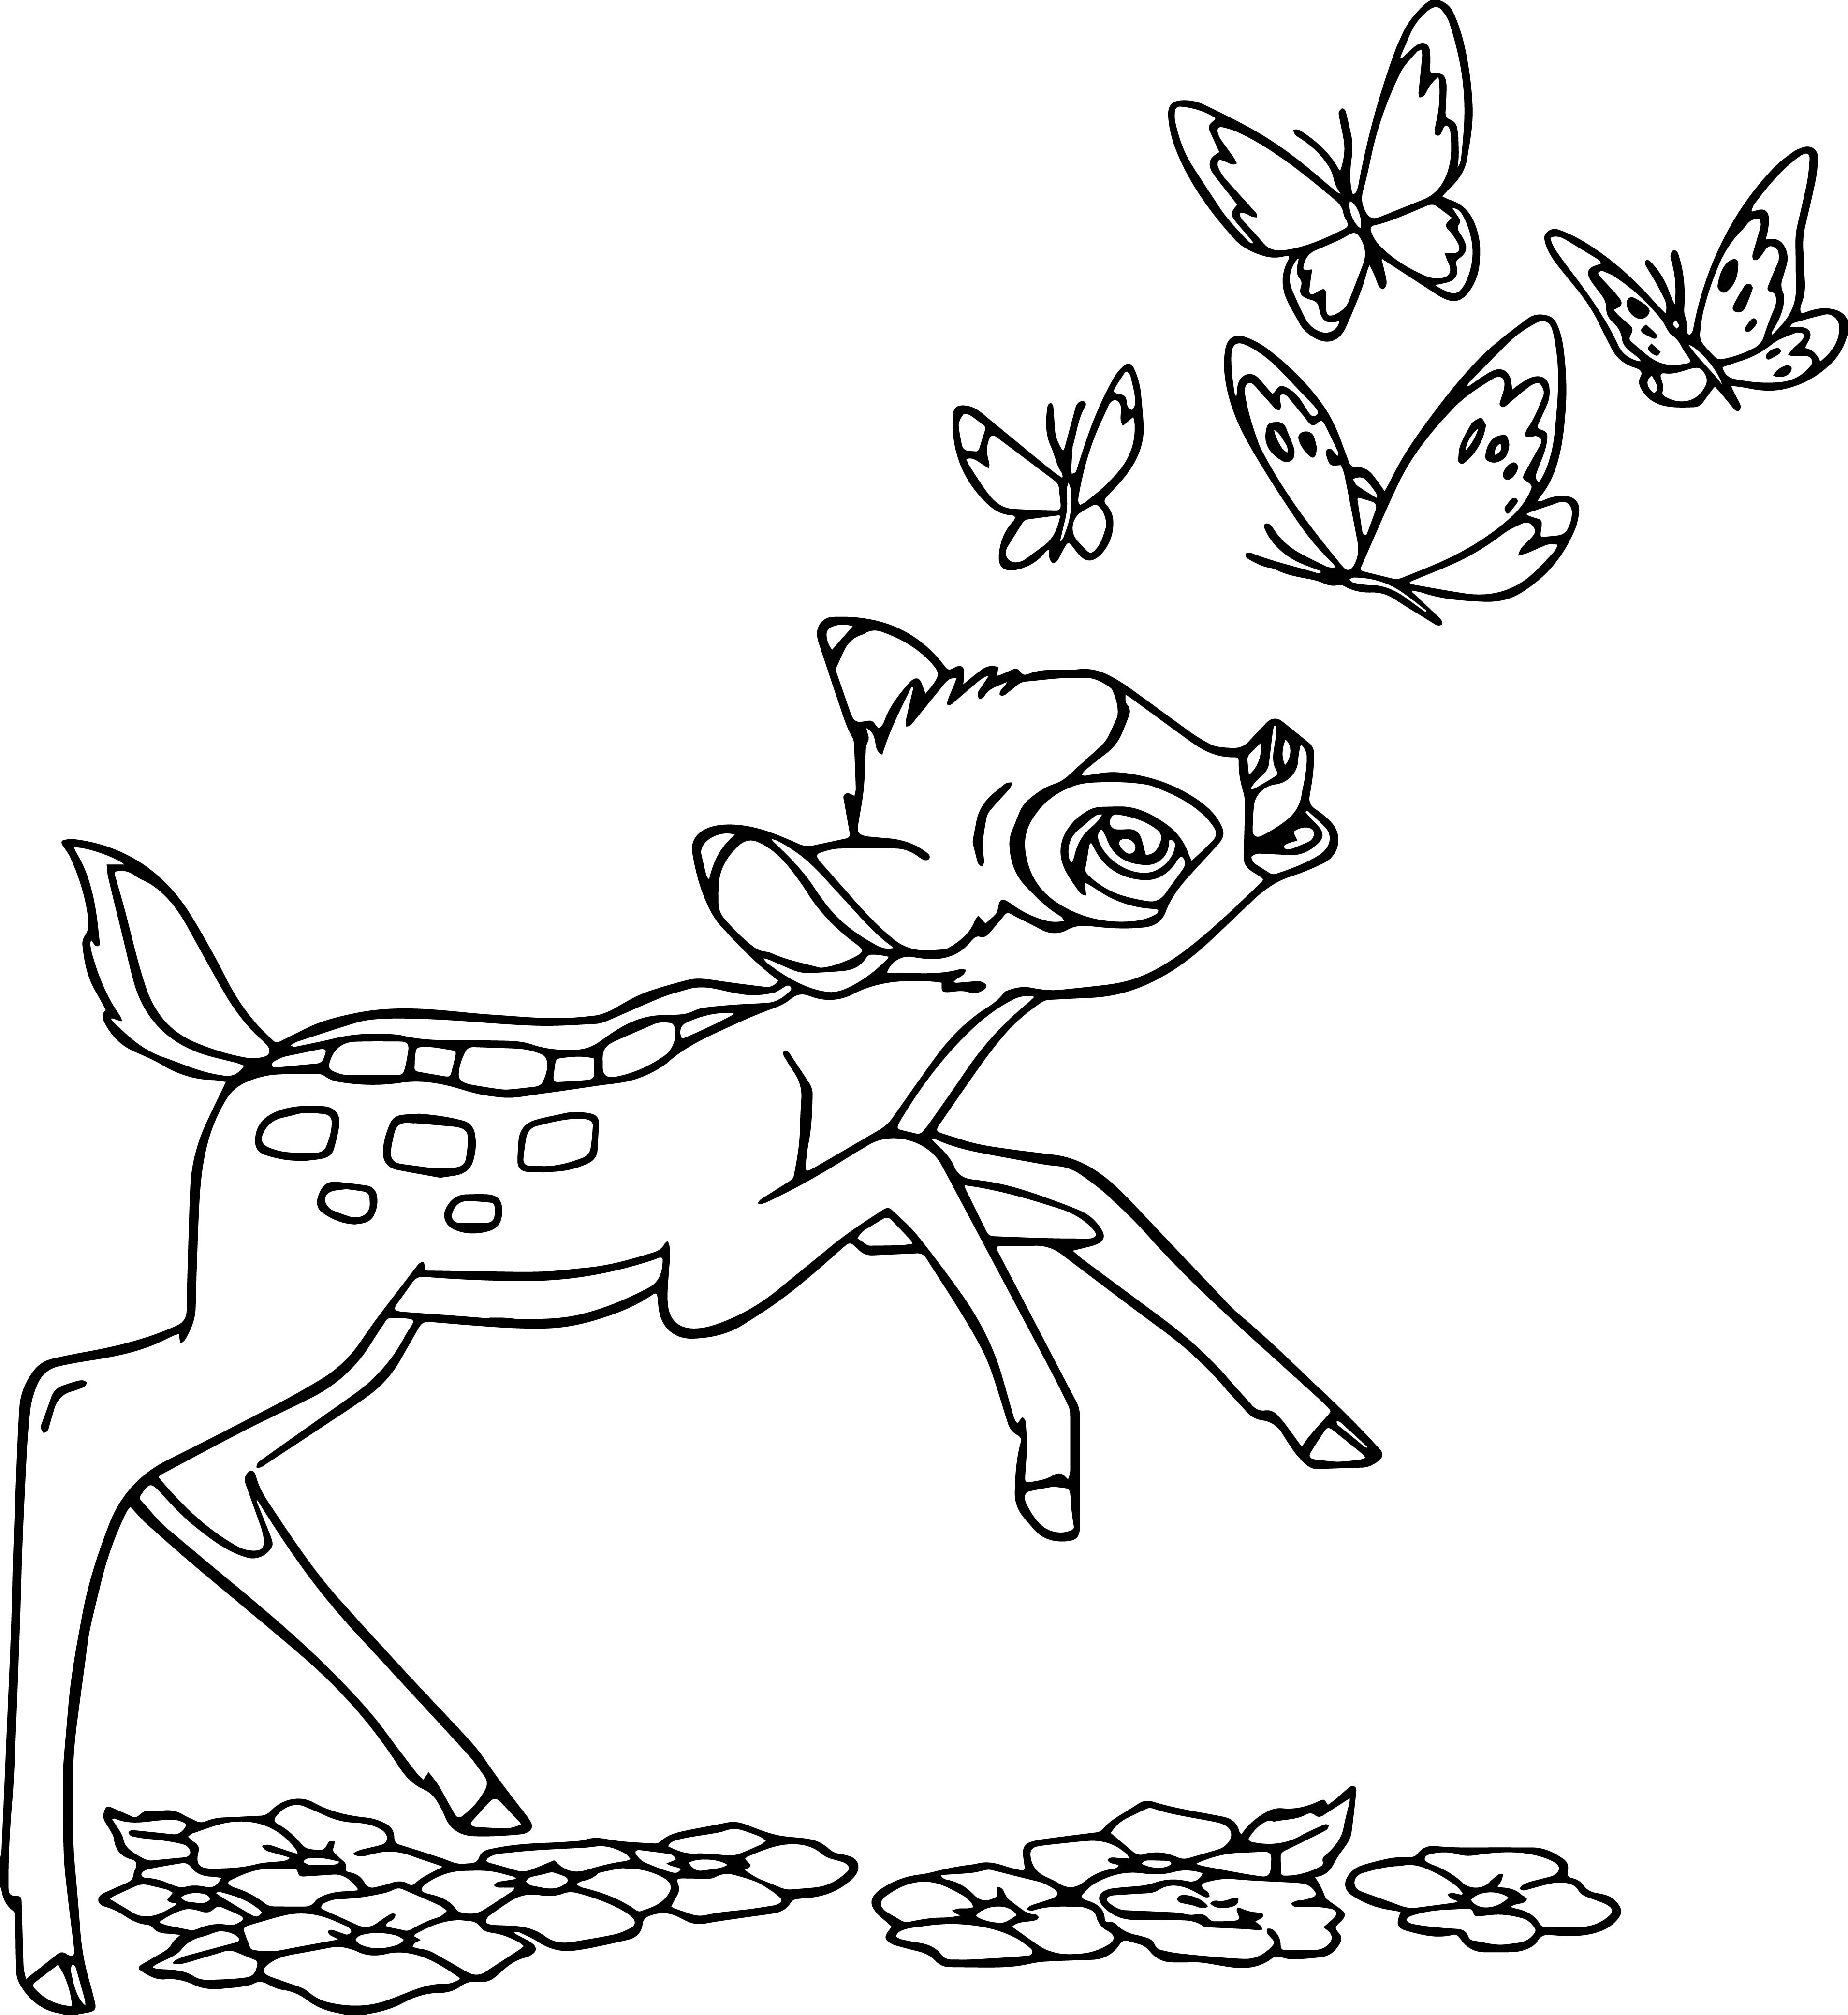 Turnip Coloring Page 33 Coloring Pages Difficult Owl Coloring Pages Hard Only